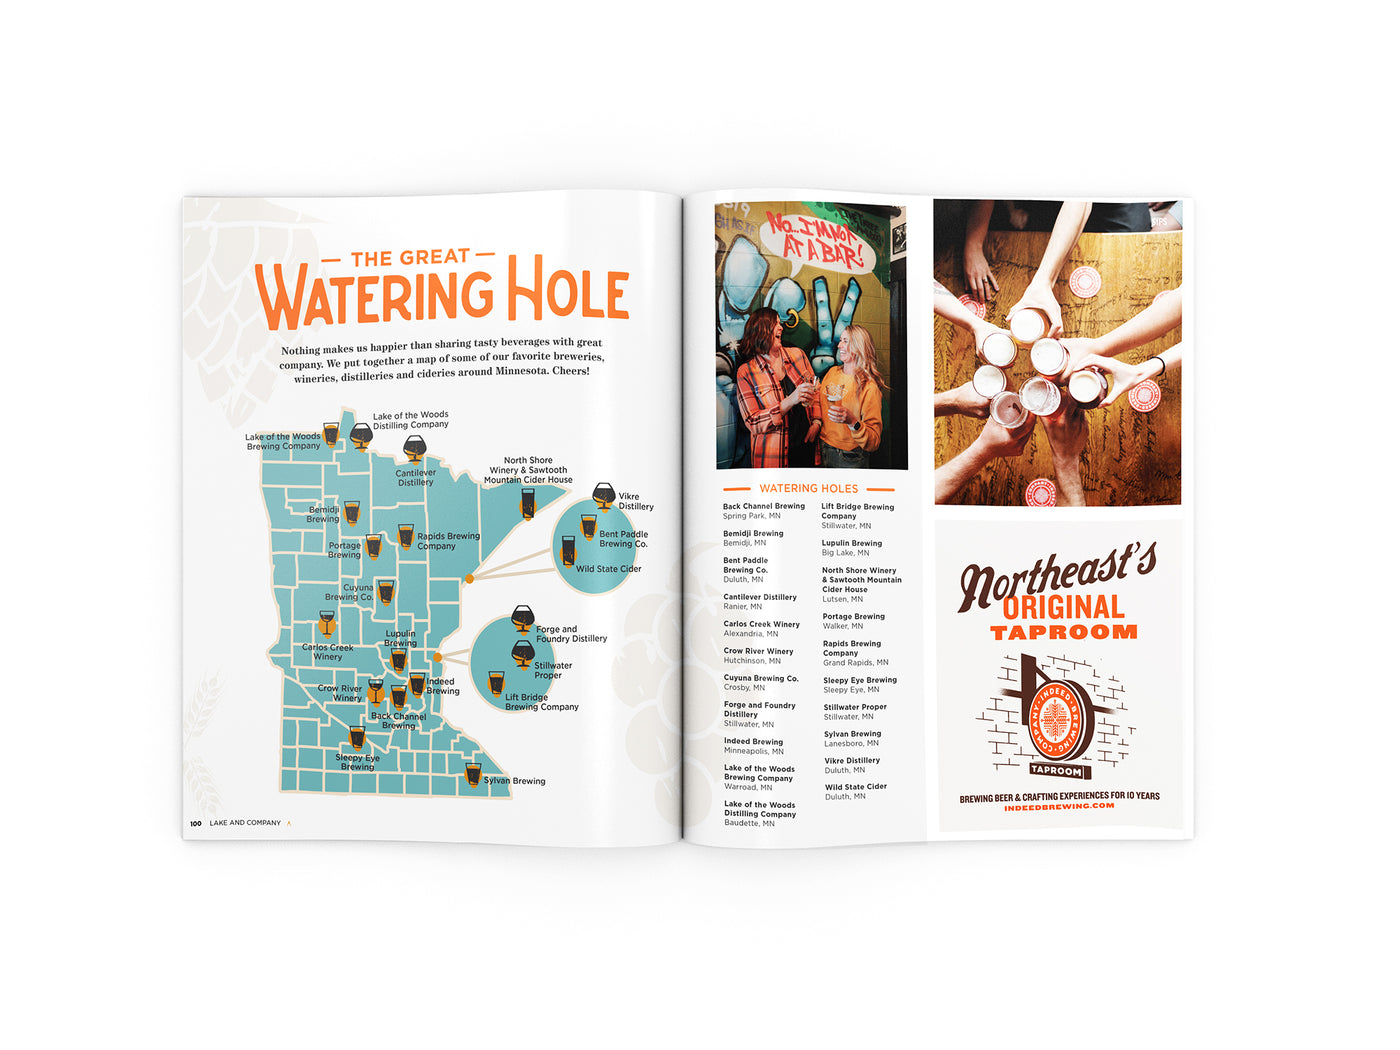 Lake and Company Minnesota Issue 23 - The Great Watering Hole - The Lake and Company